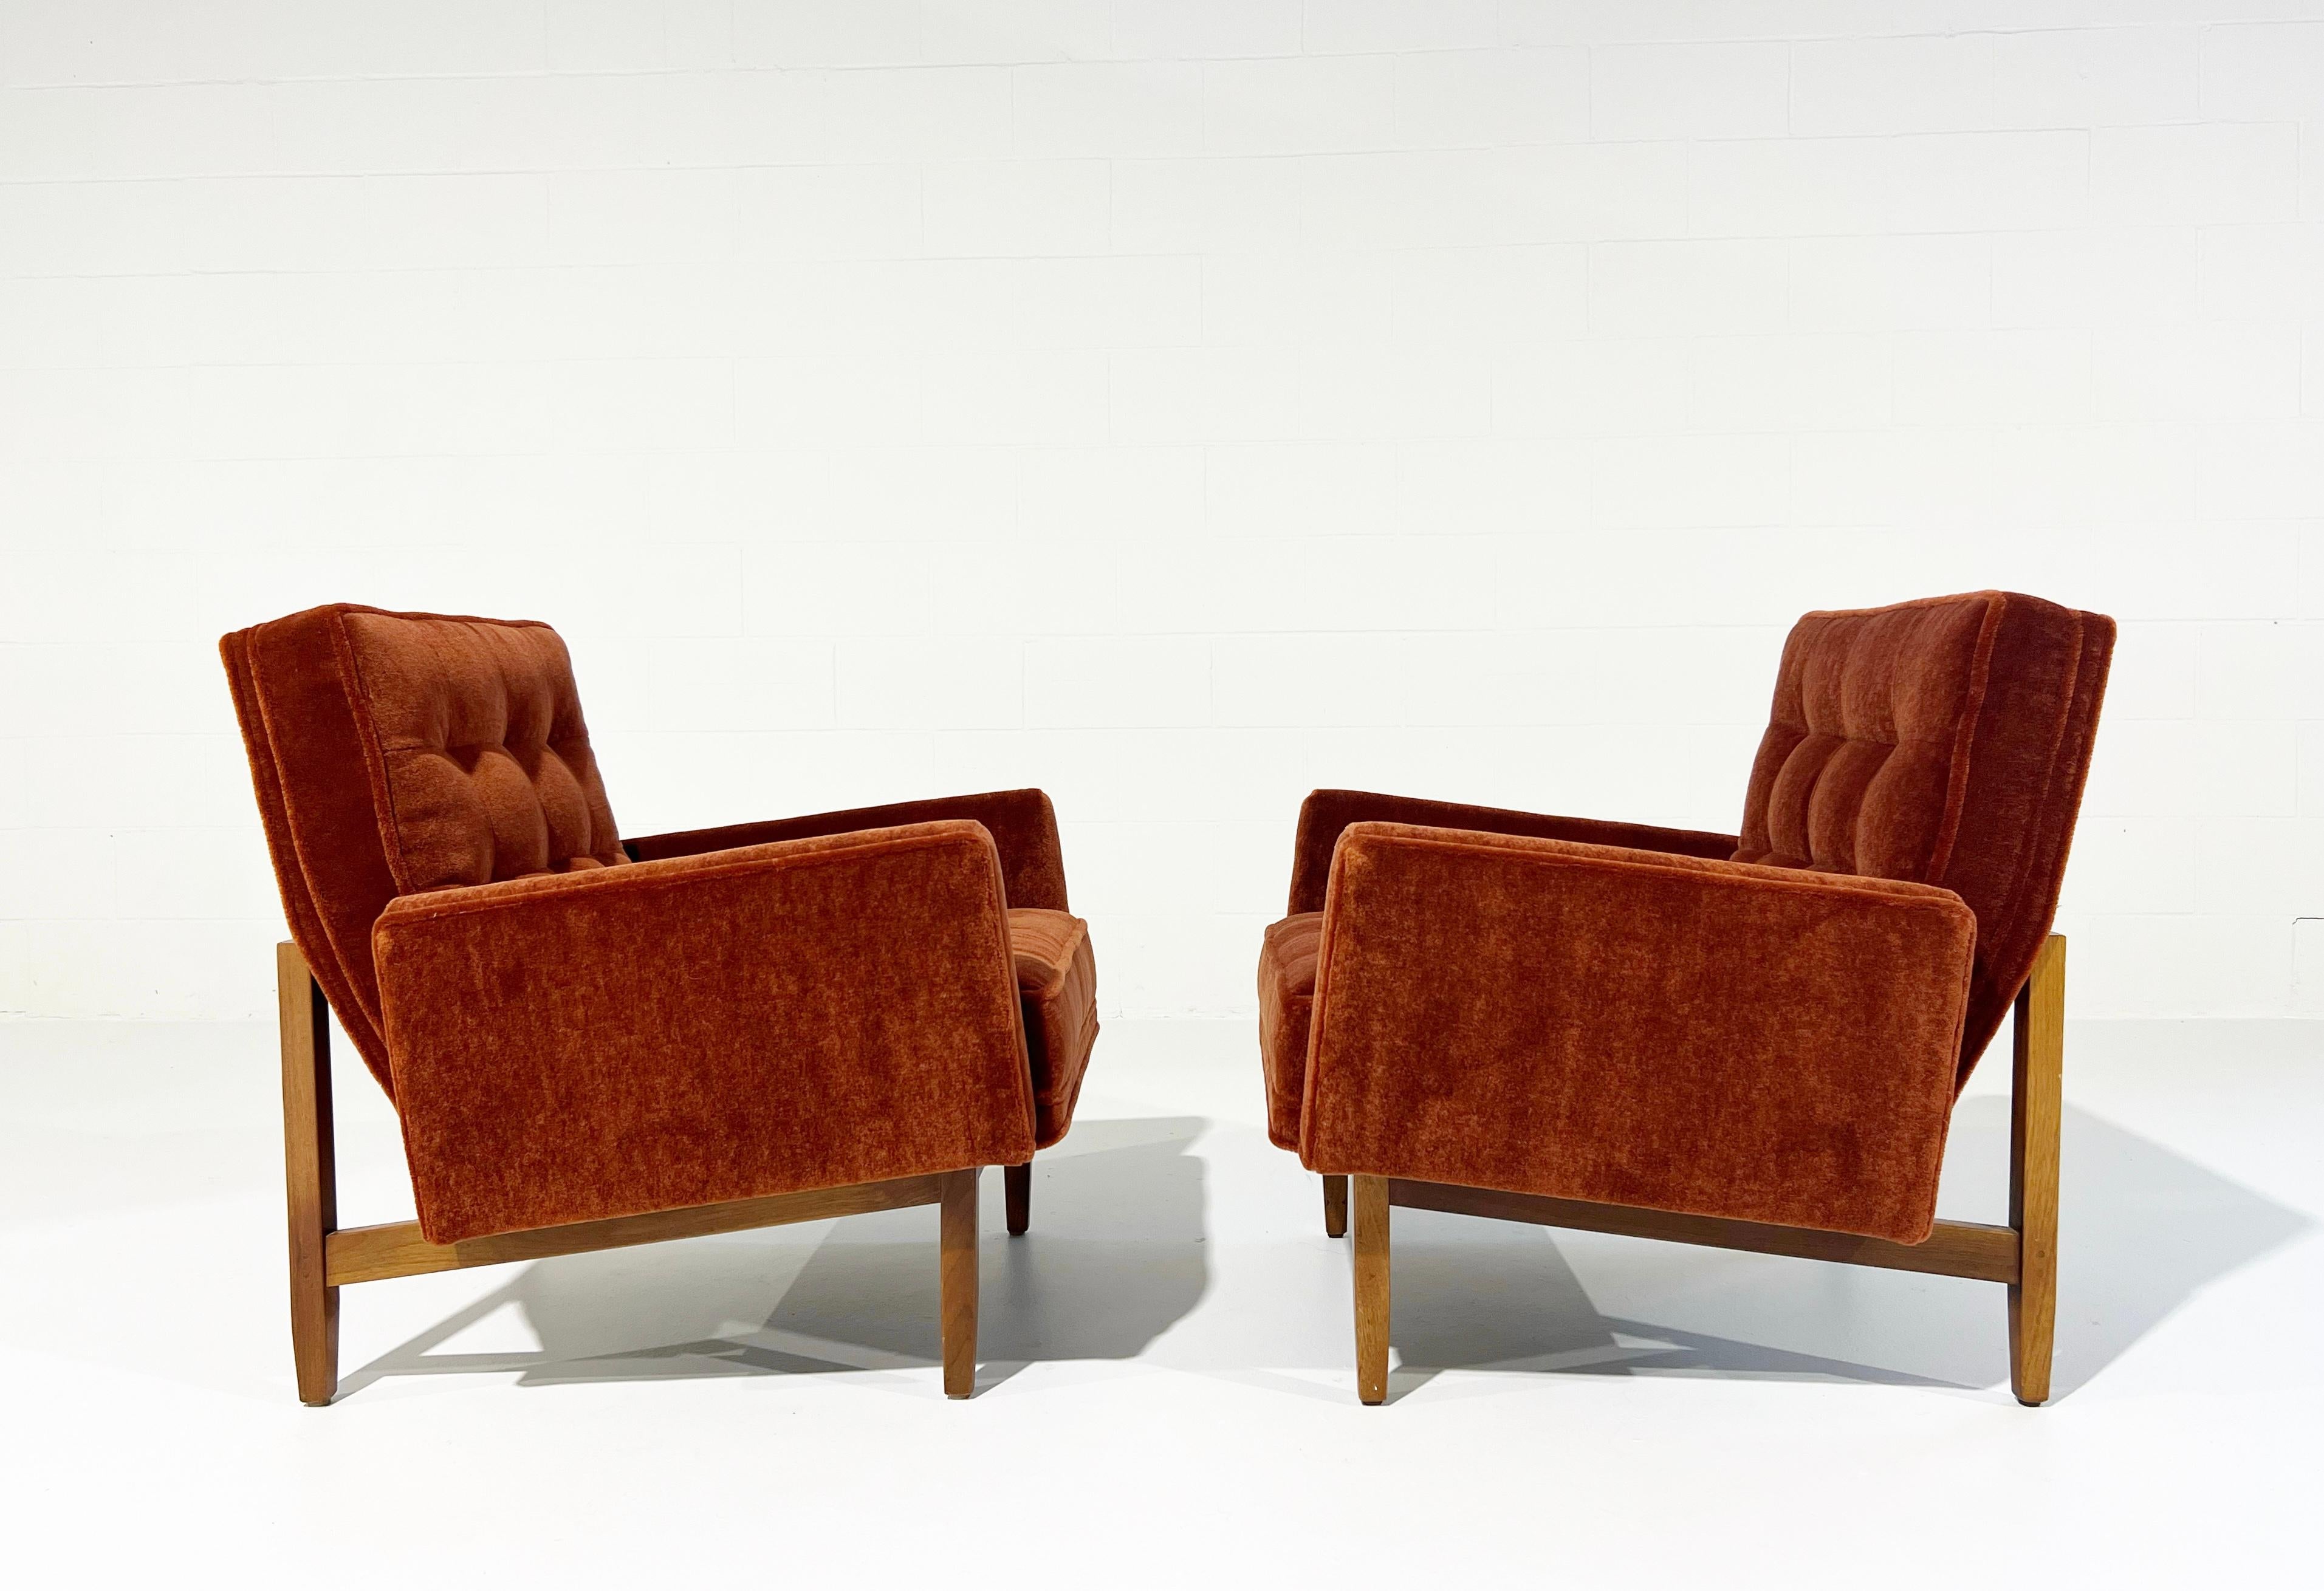 Vintage Restored Florence Knoll Armchairs in Pierre Frey Teddy Mohair For Sale 4